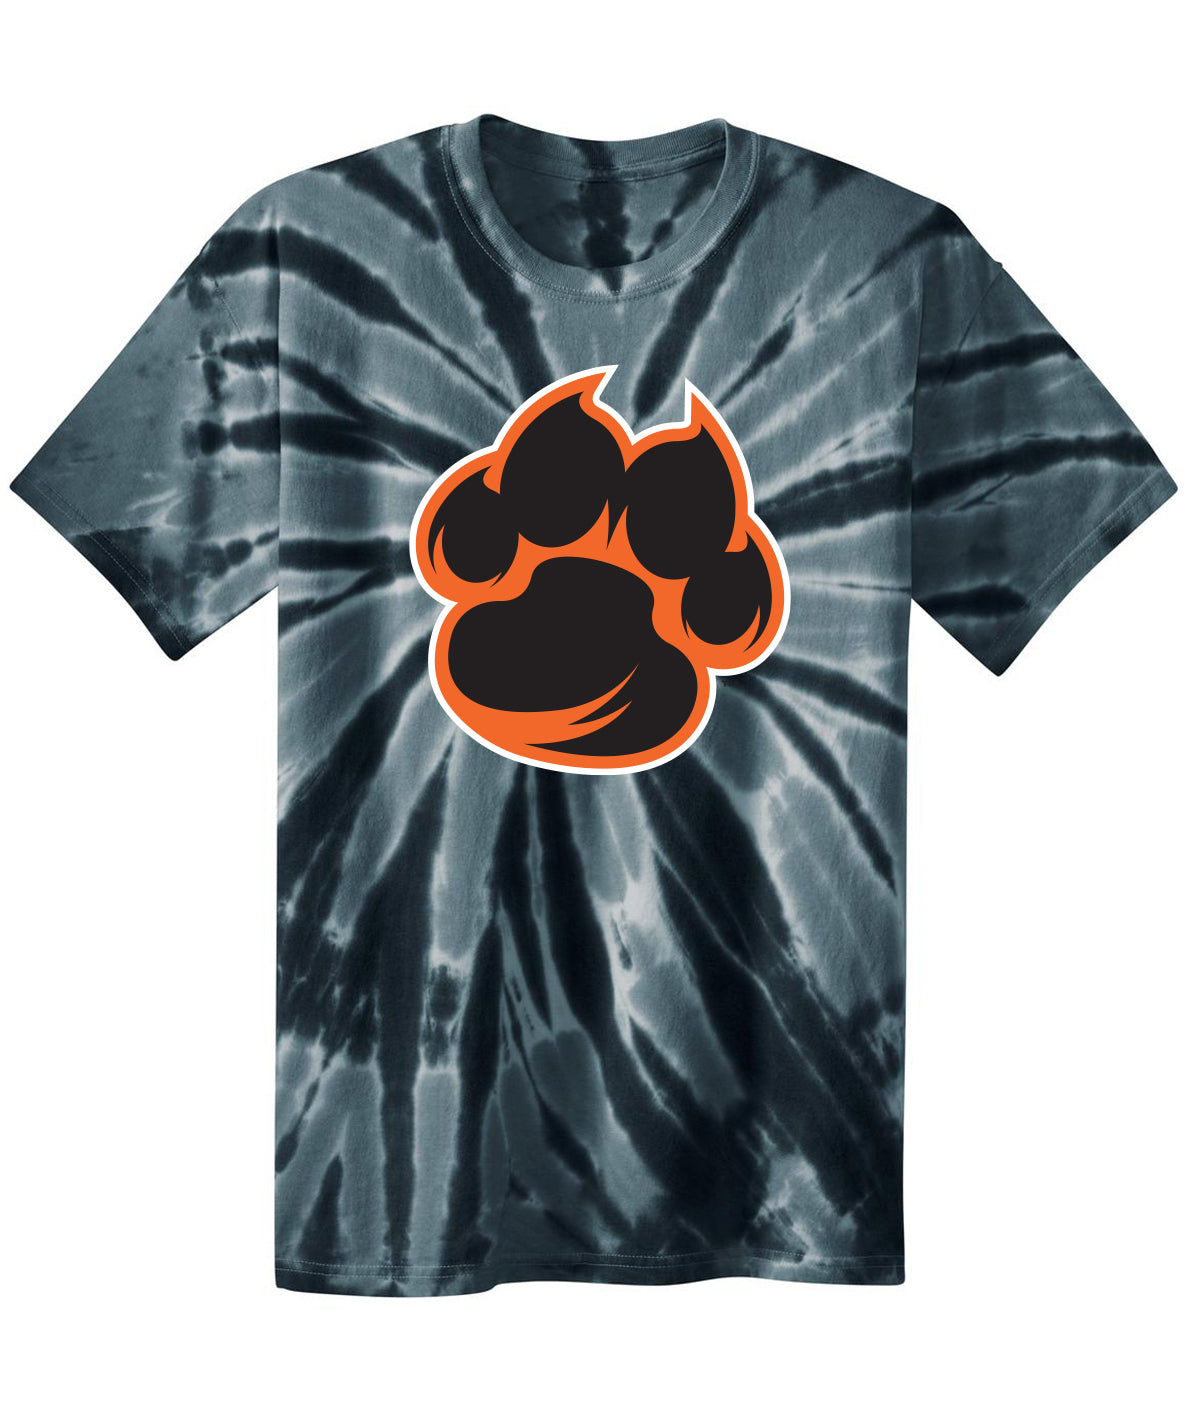 Tiger Paw Youth Tie-Dye Tee